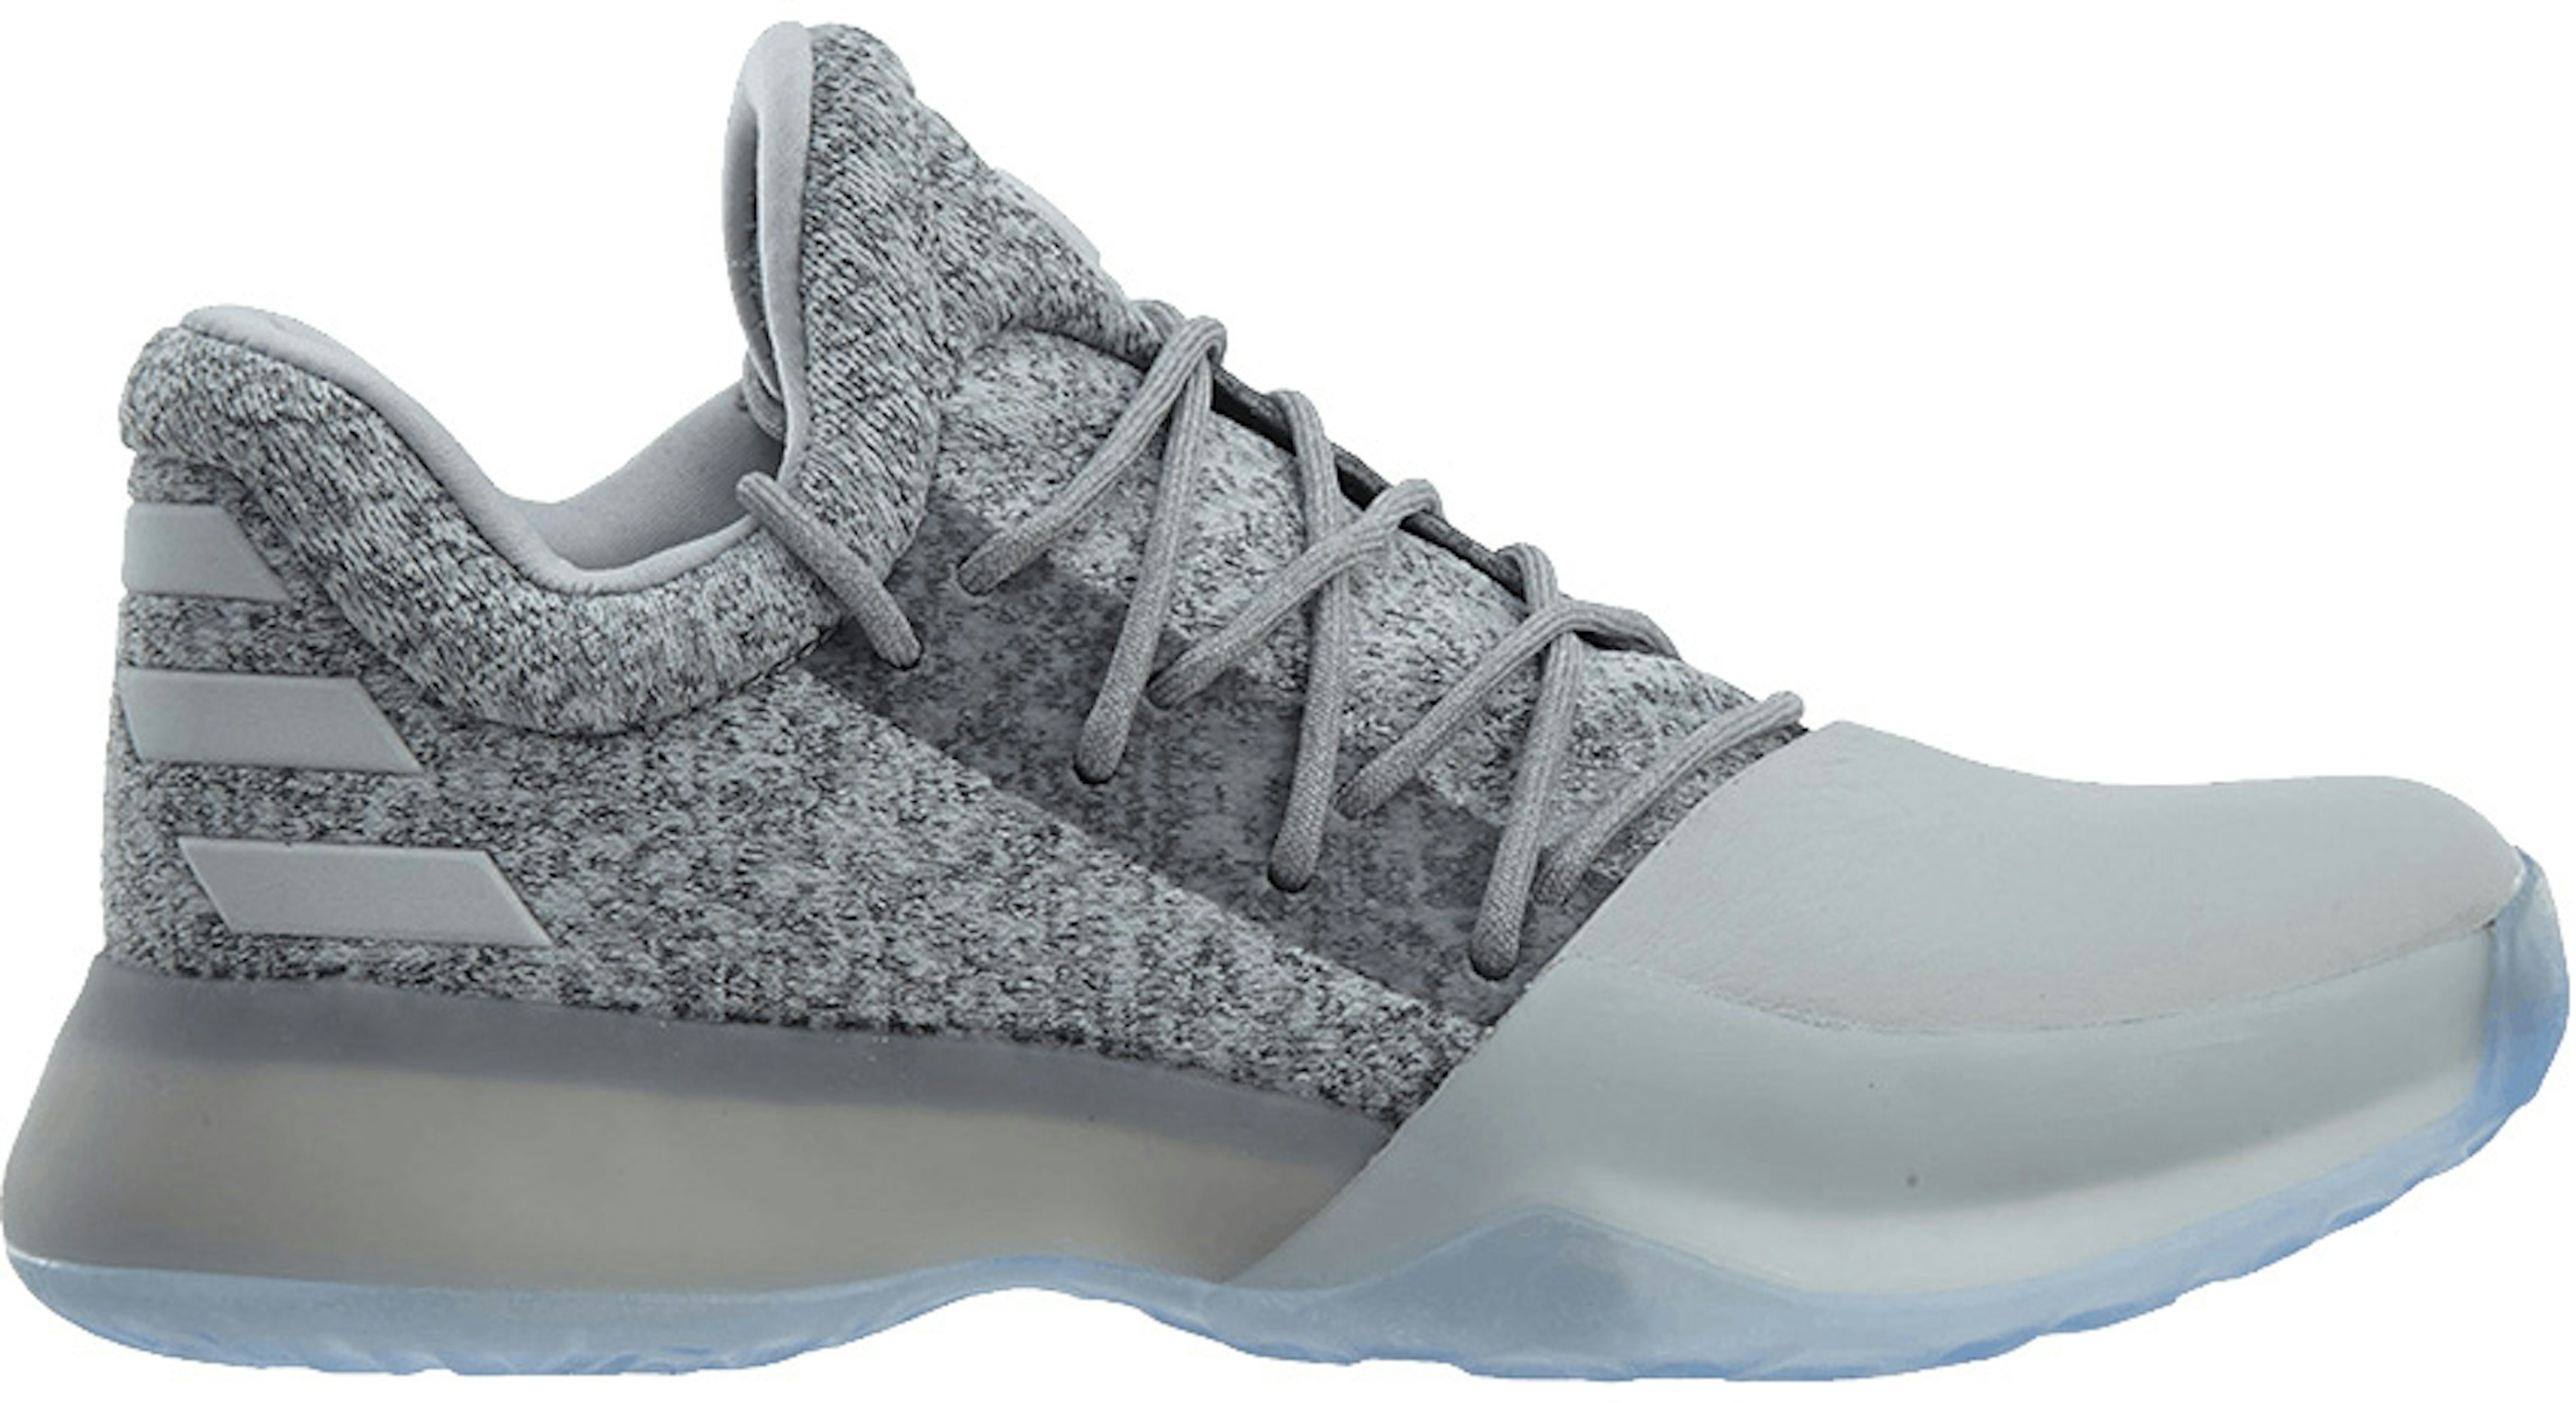 adidas Harden Vol. 1 Grey White (Youth) - BY3480